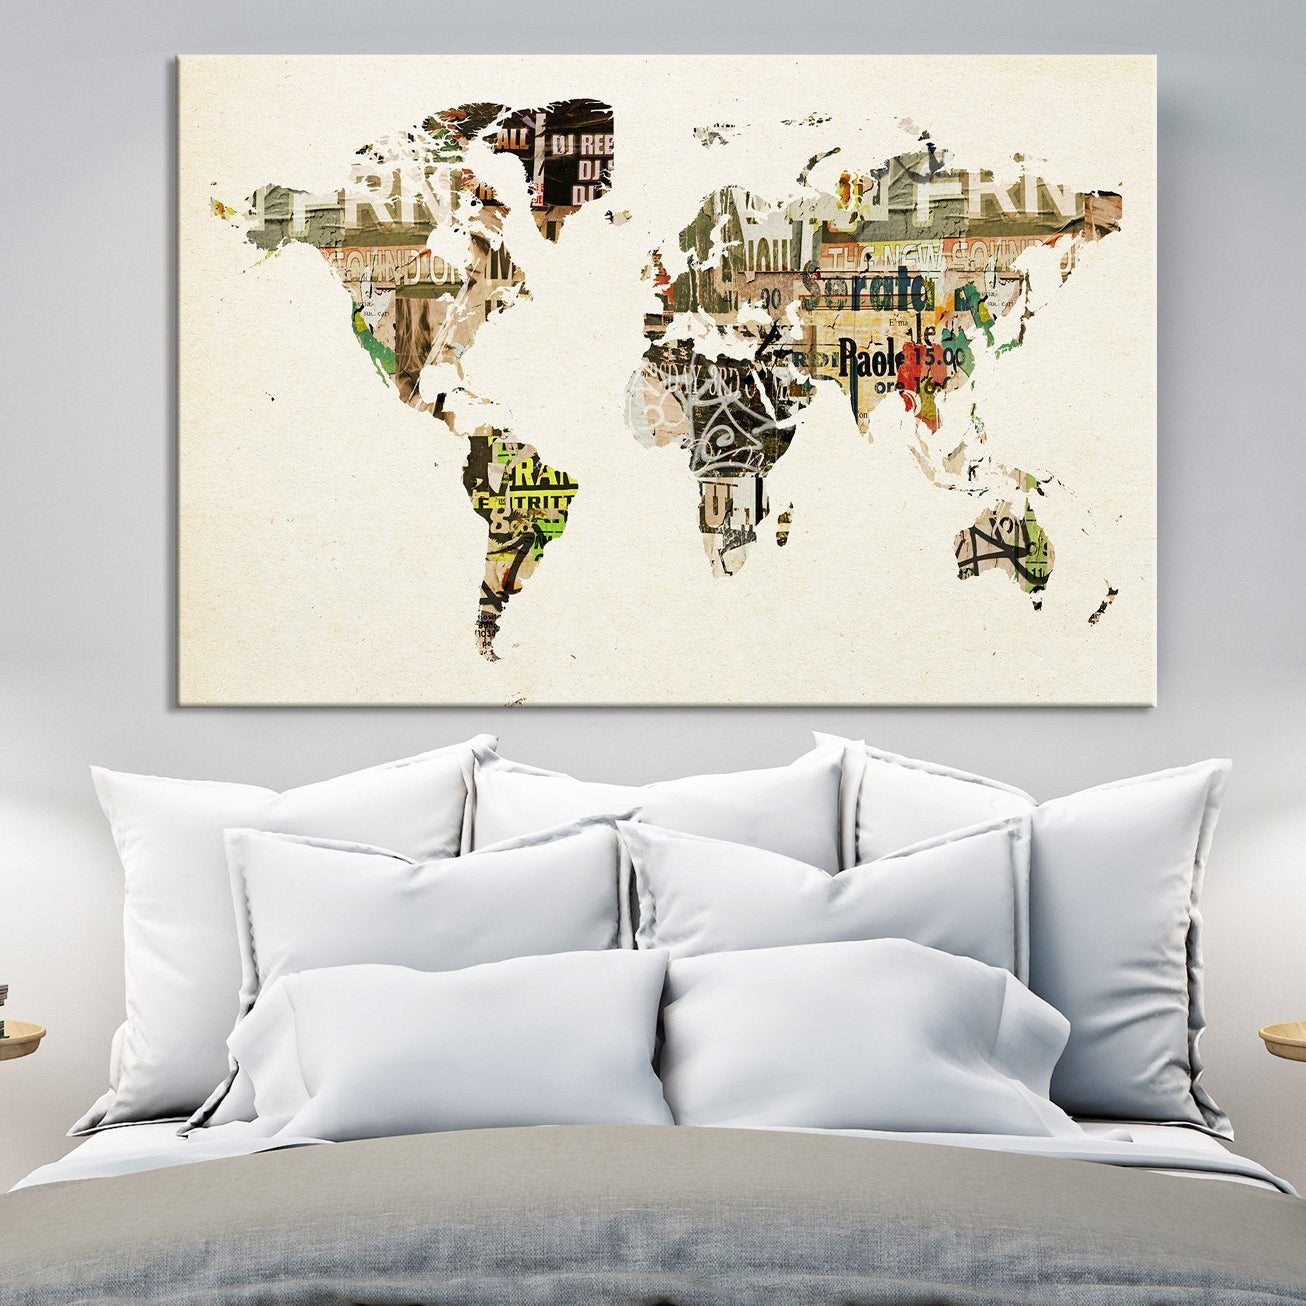 World Map with Grunge Posters Large Canvas Art Print, World Map for Home Art Print No:022-Giclee Canvas Print-World Map Wall Art-Single Panel-24x16-Extra Large Wall Art Canvas Print